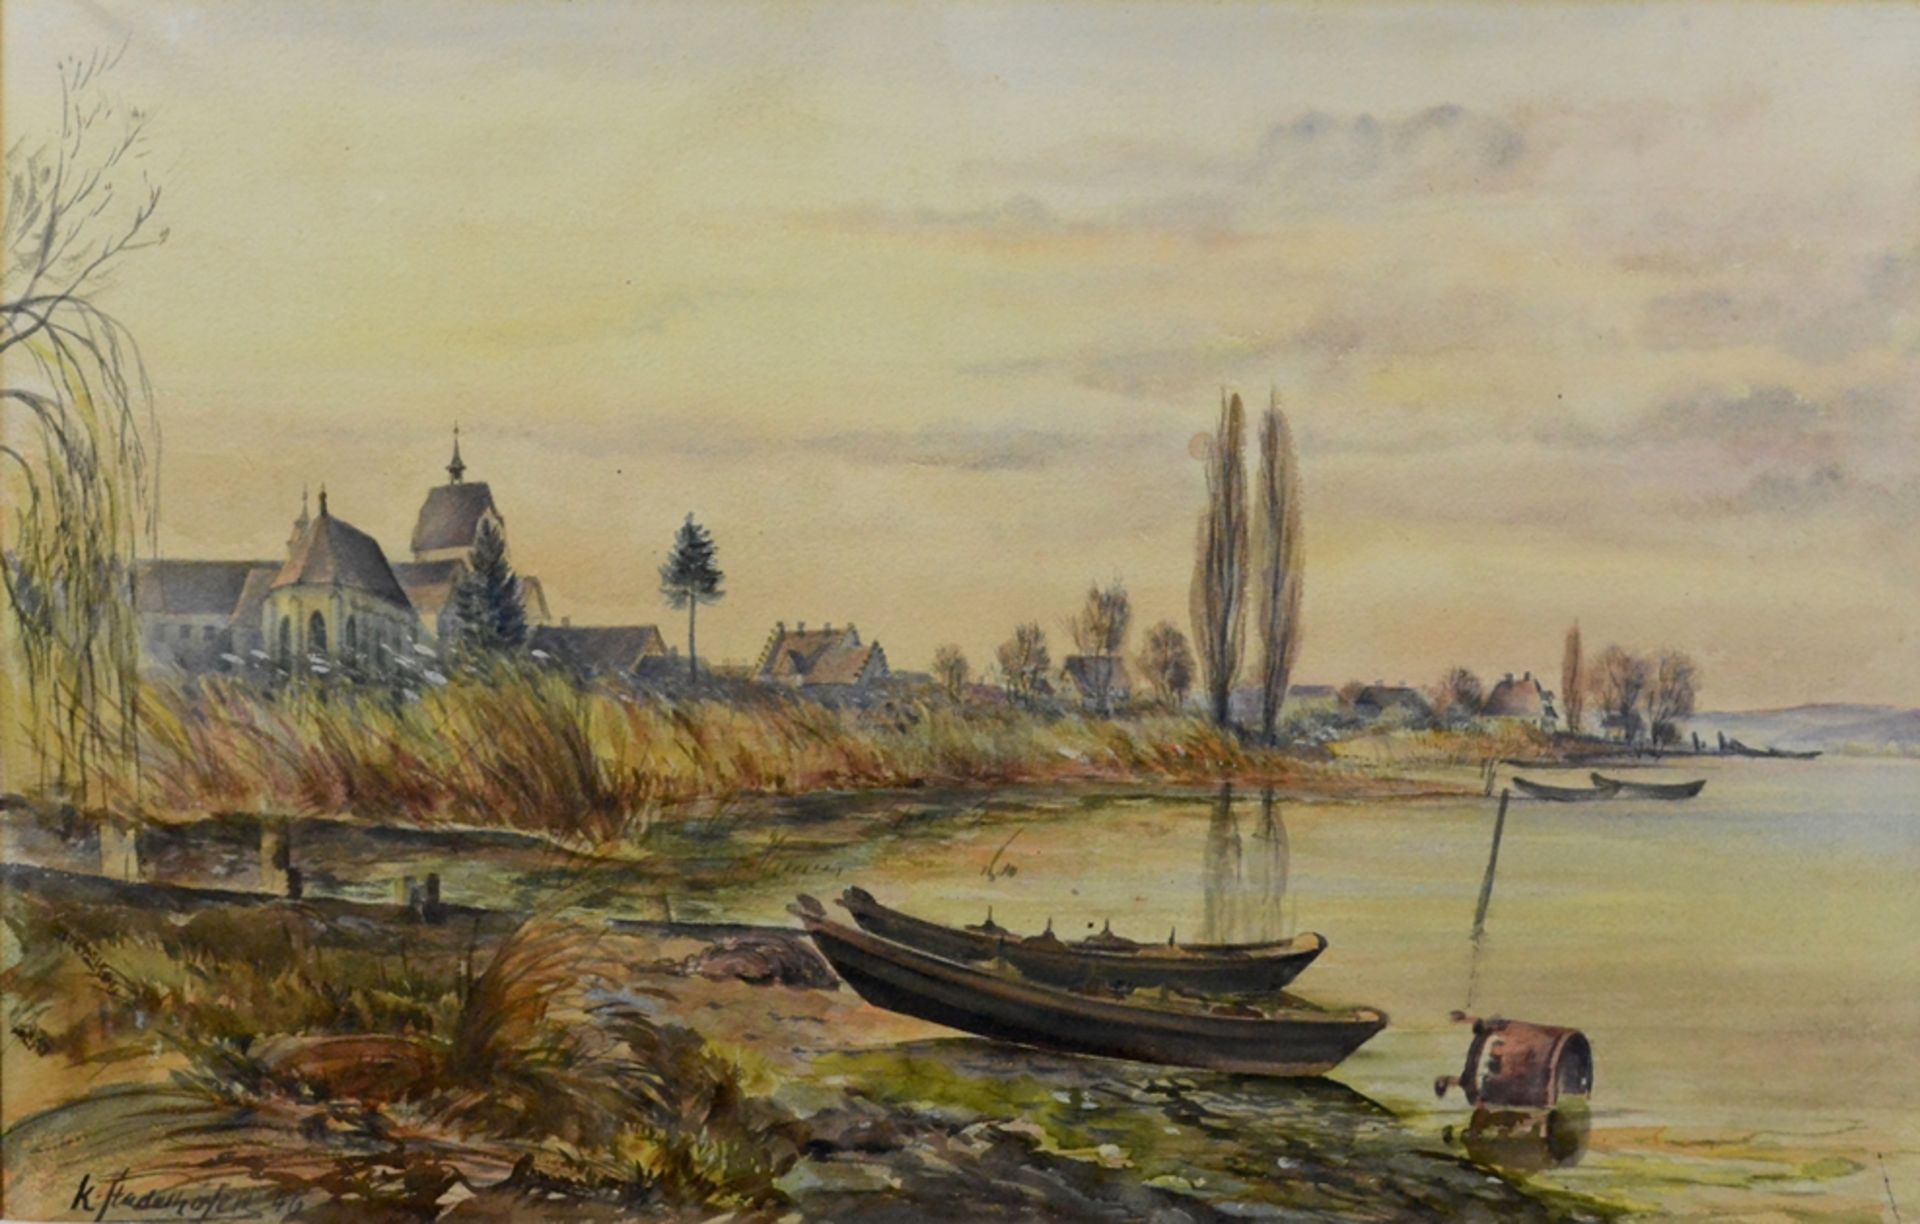 Stadelhofer, Karl (1897 - 1960 Wollmatingen-Konstanz), "Reichenau", with a view of the shore and th